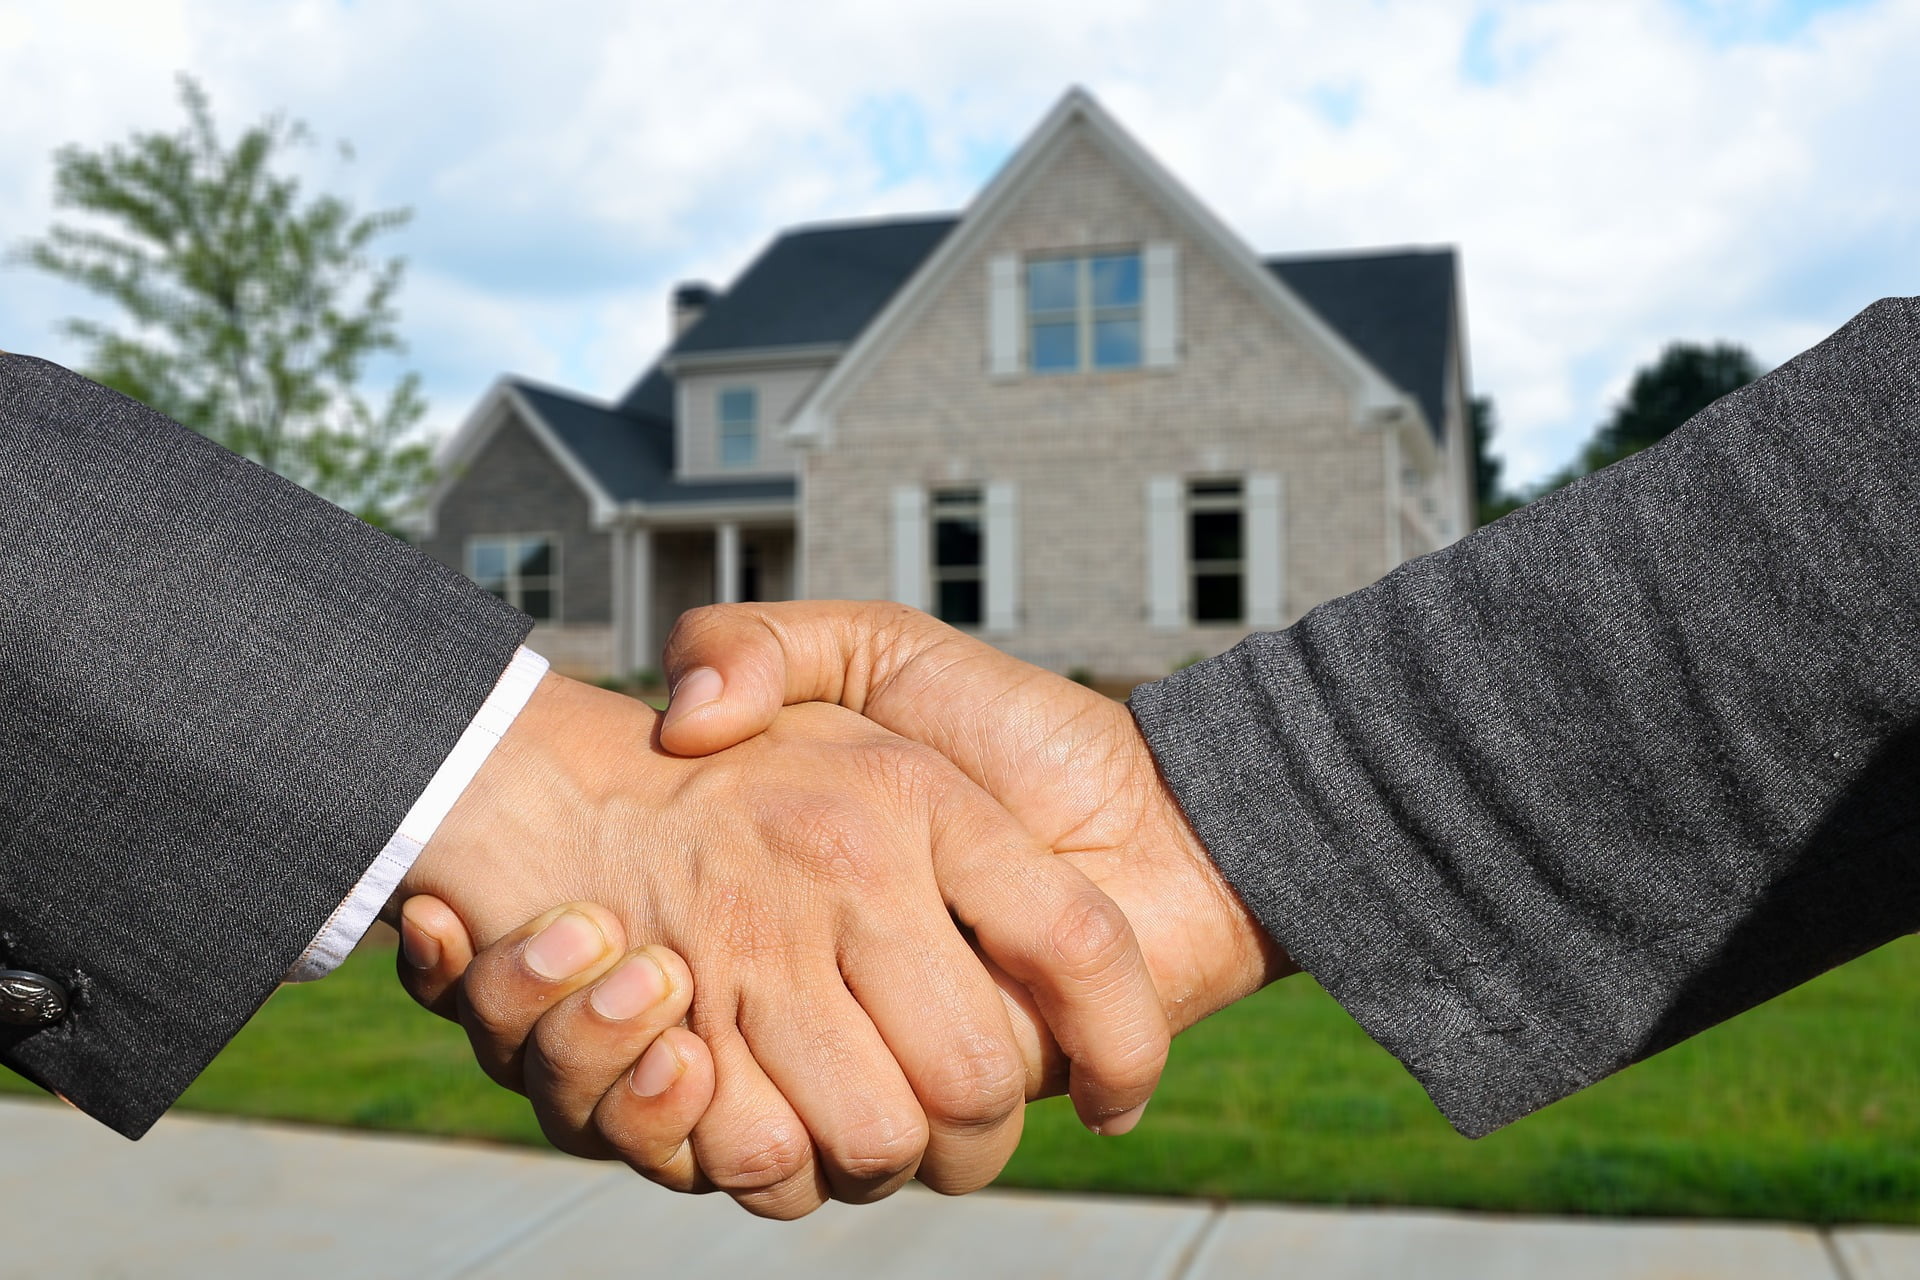 Real Estate Lawyer Shaking Hands